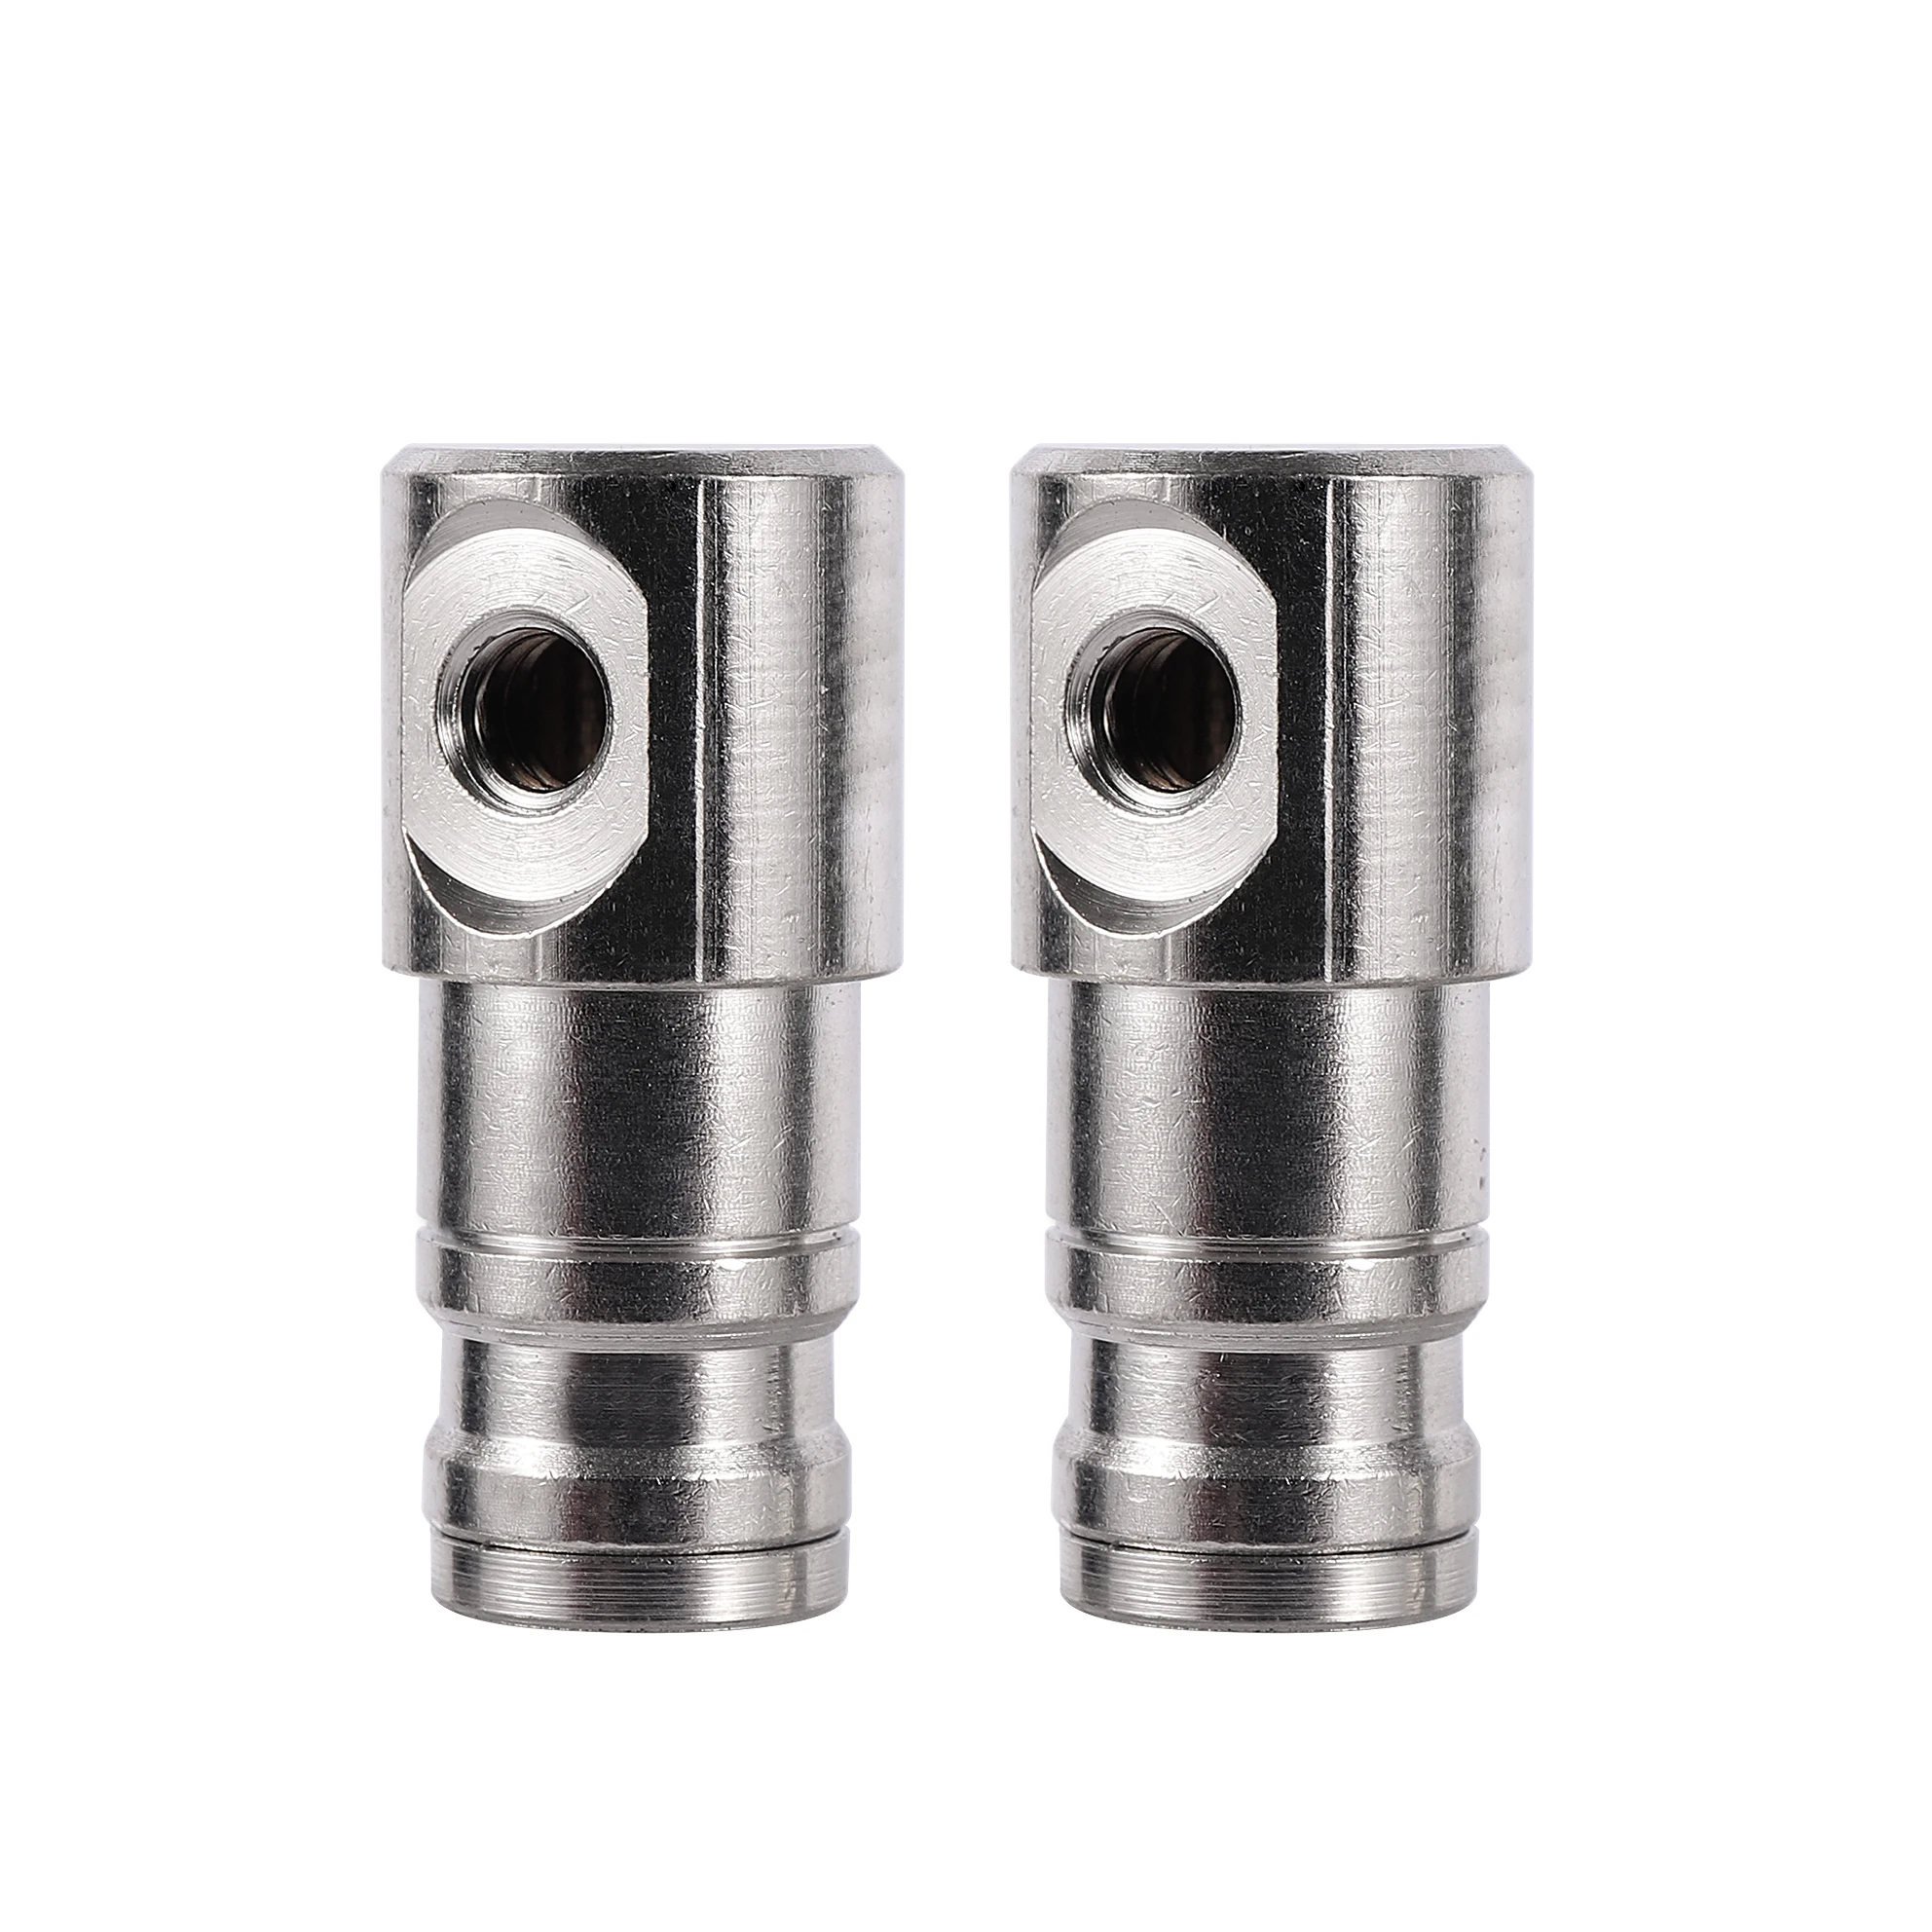 1/4” Pipe Slip Lock Connector Nickel Plated Copper Quick Coupling High Pressure Misting Irrigation OD 6.35mm Tube Nozzle Fitting